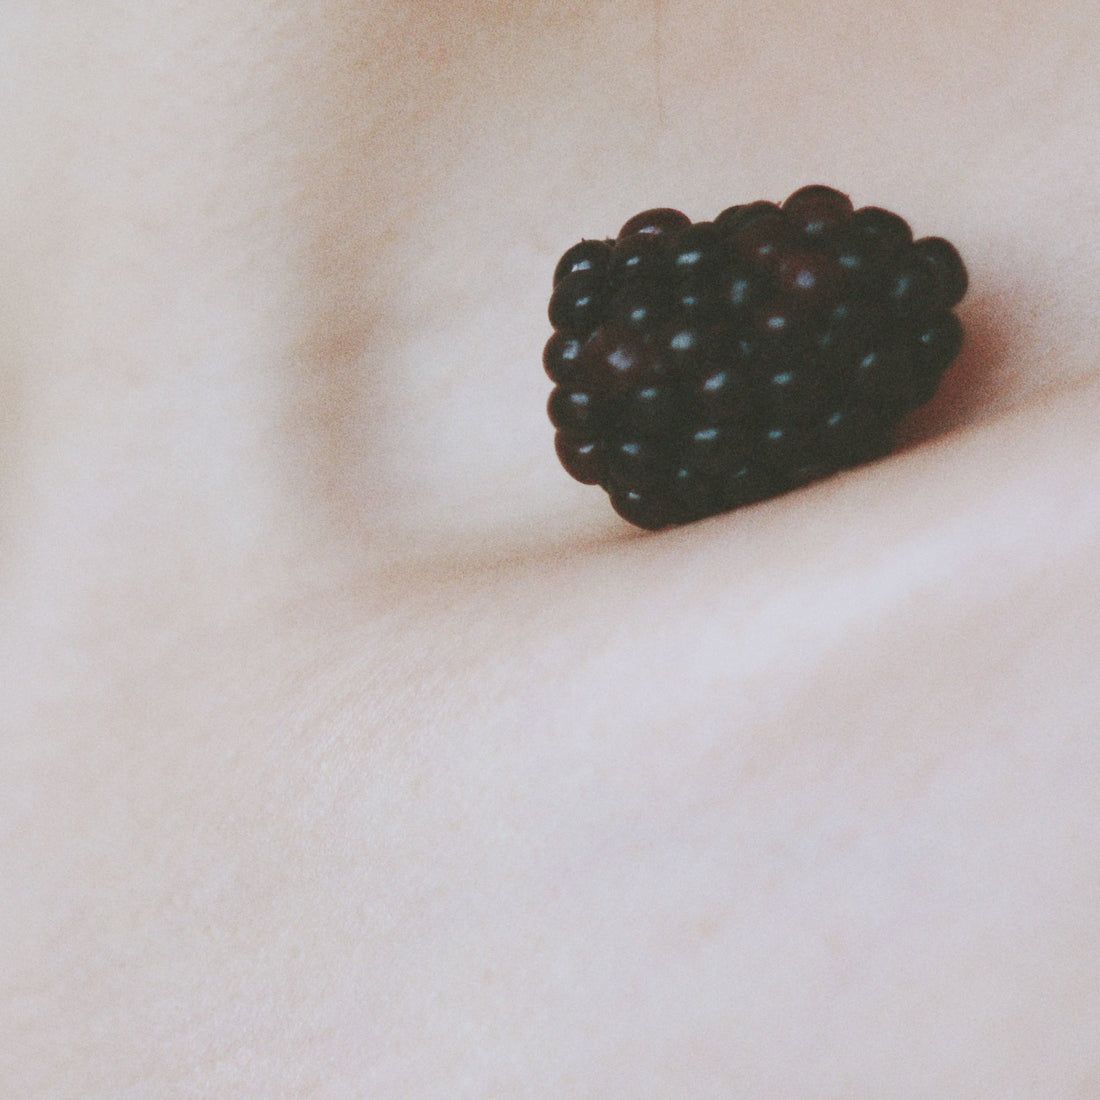 Blackberry nestling in the collarbone of a white person.